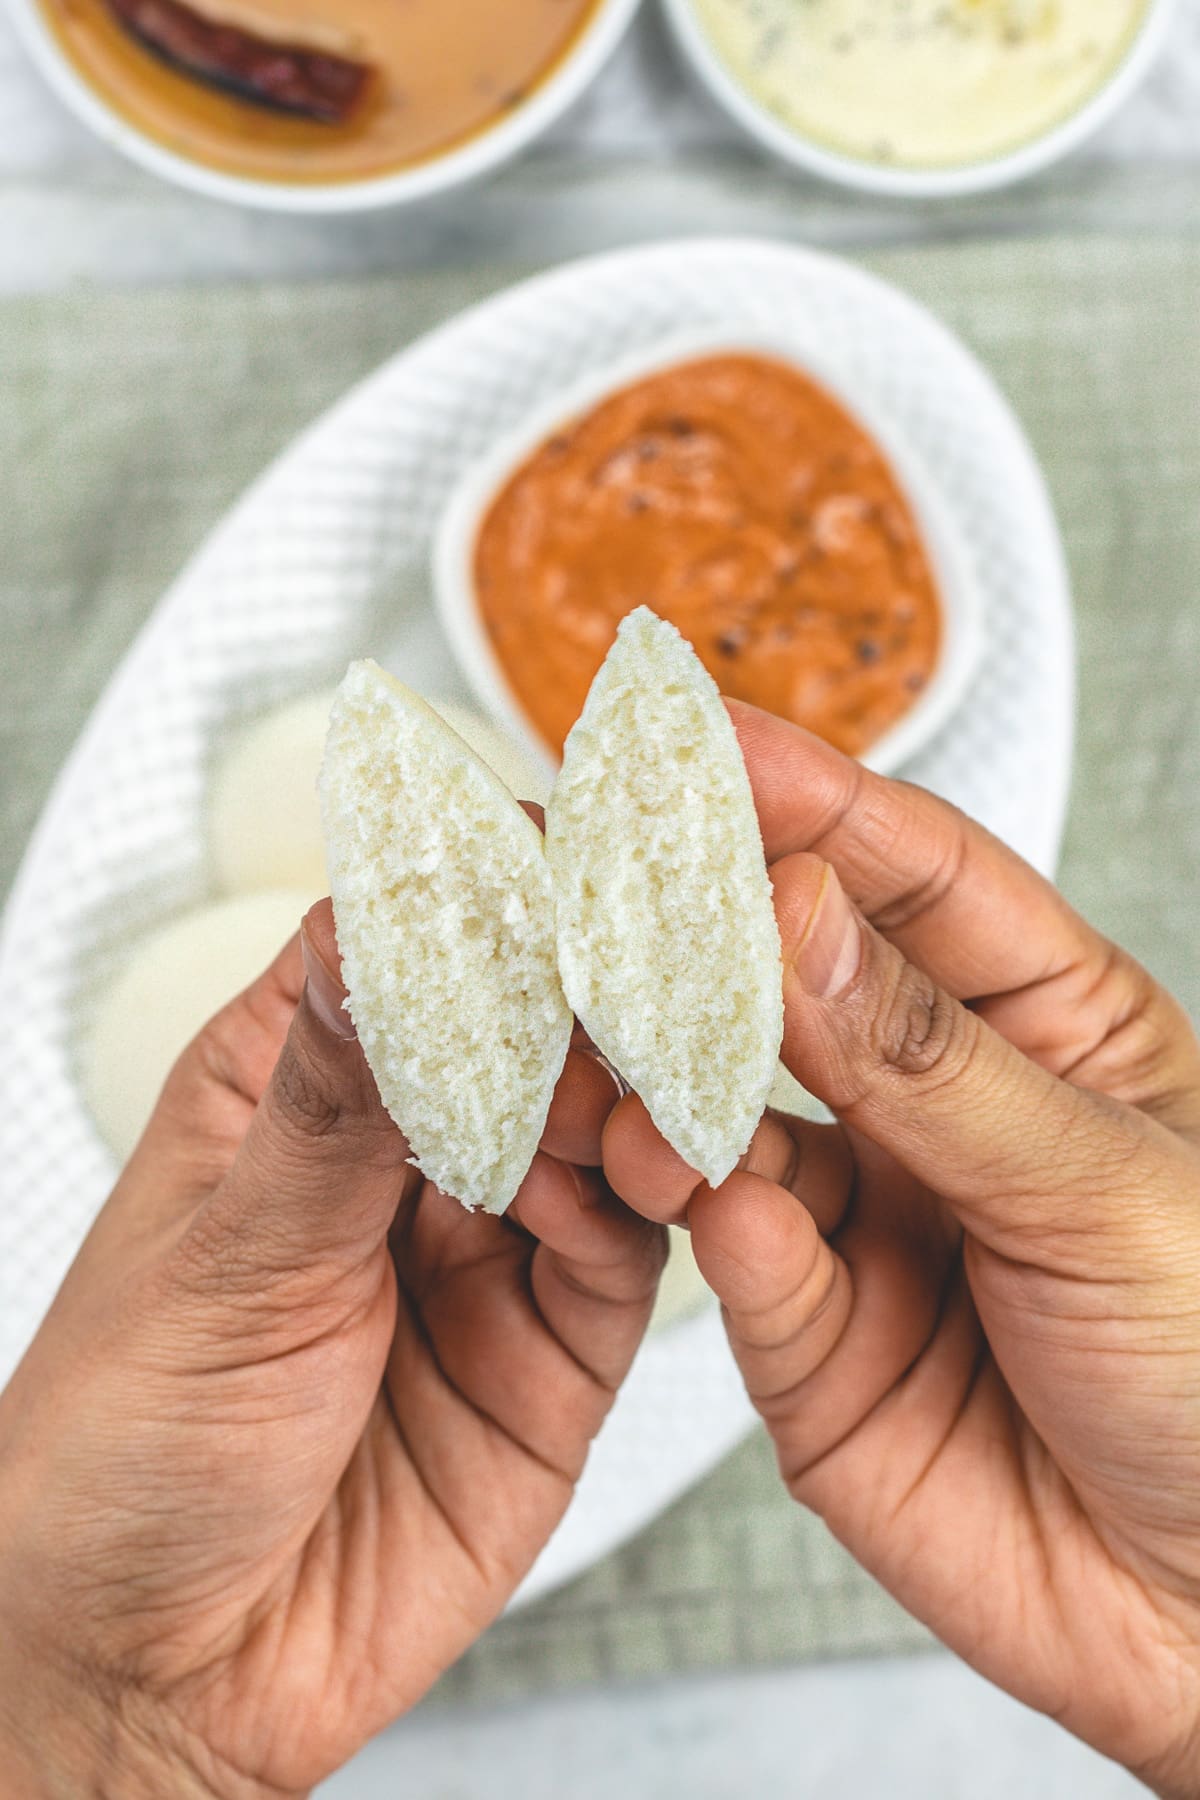 Showing idli texture by cutting into half.